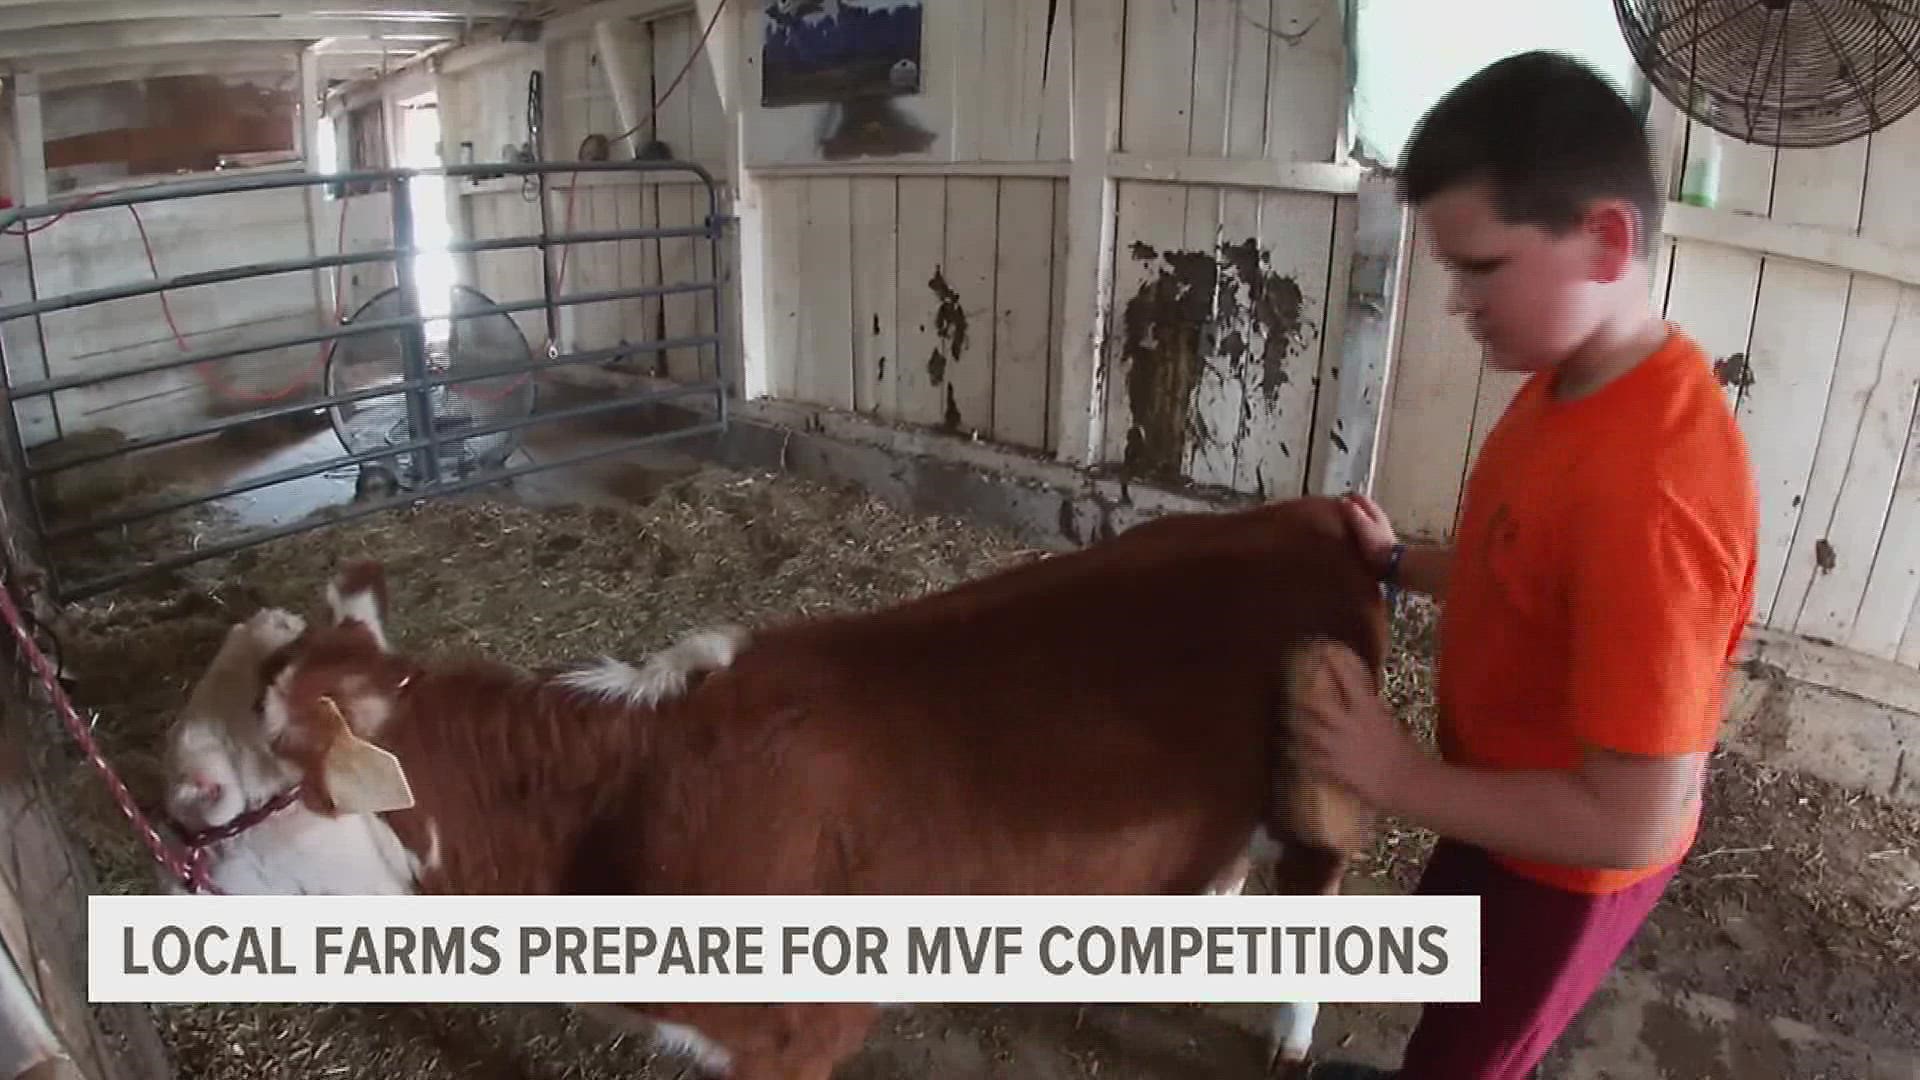 Cattle, rabbits and even homemade welding projects will be on display for viewing and judging at the 2022 Mississippi Valley Fair.